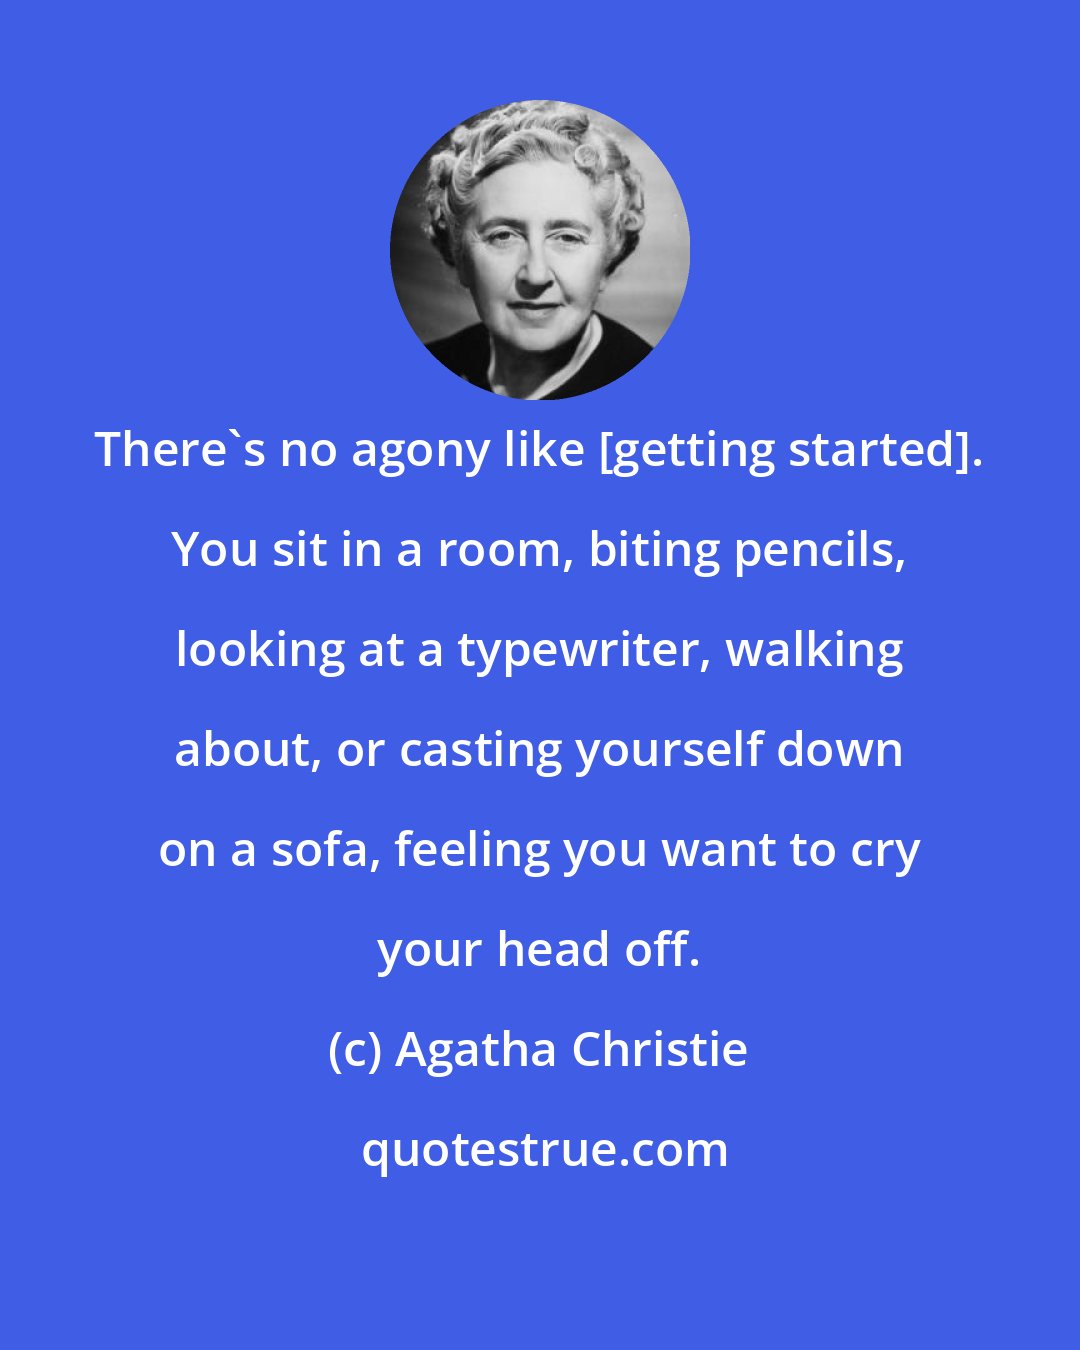 Agatha Christie: There's no agony like [getting started]. You sit in a room, biting pencils, looking at a typewriter, walking about, or casting yourself down on a sofa, feeling you want to cry your head off.